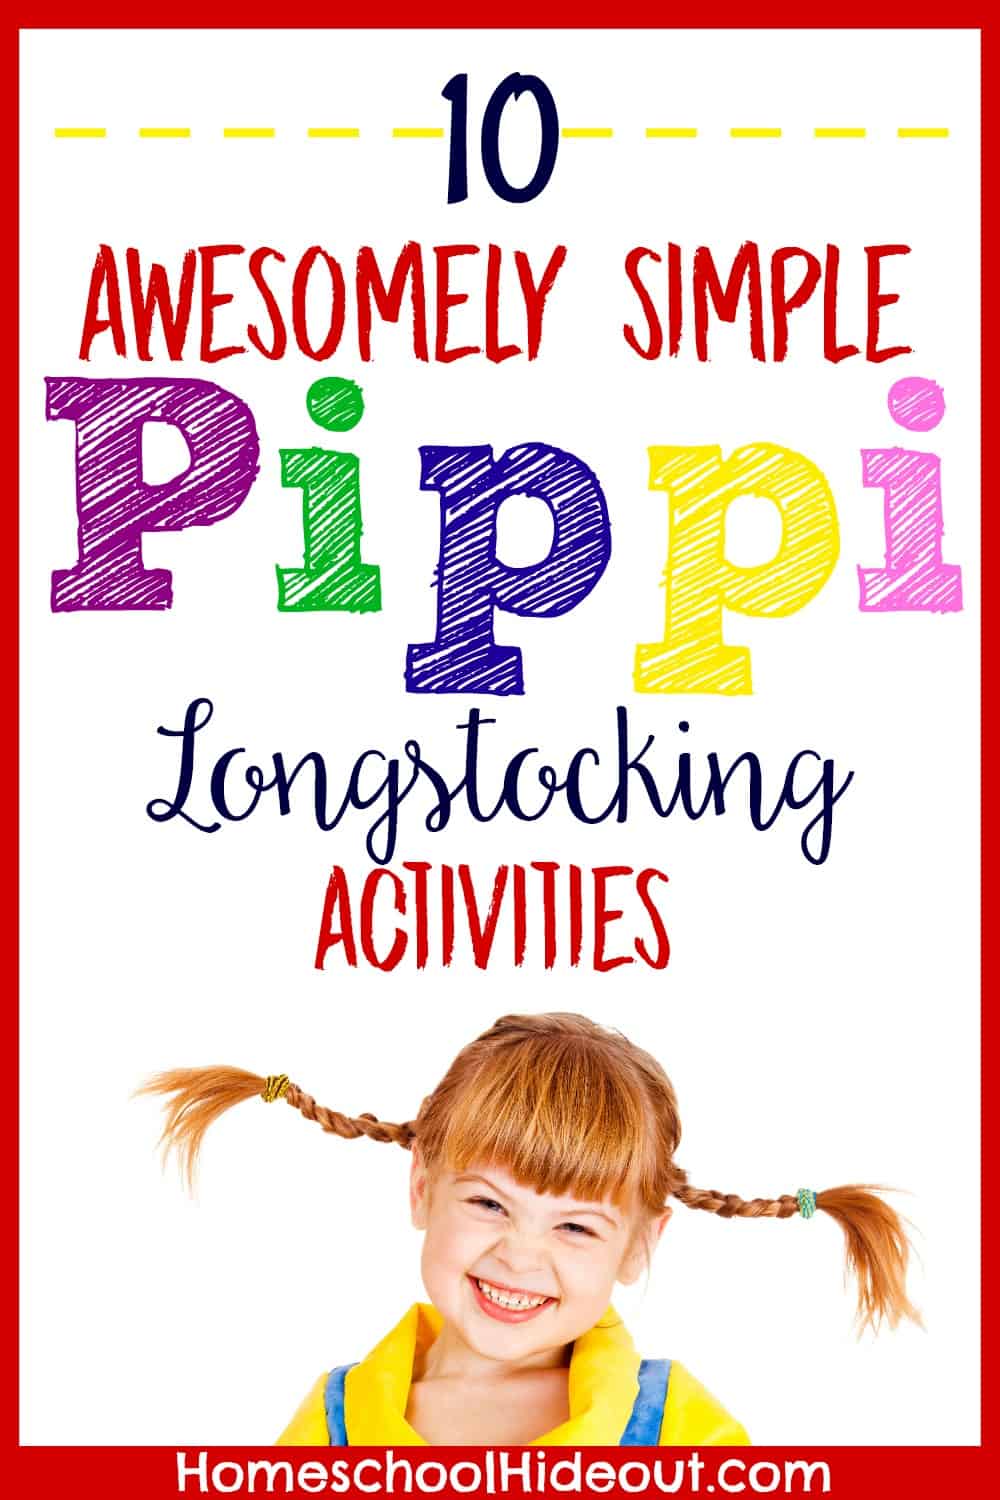 Looking for some fun and hilarious Pippi Longstocking activities? We've got 10 MUST-TRY ideas for when you're reading the book.